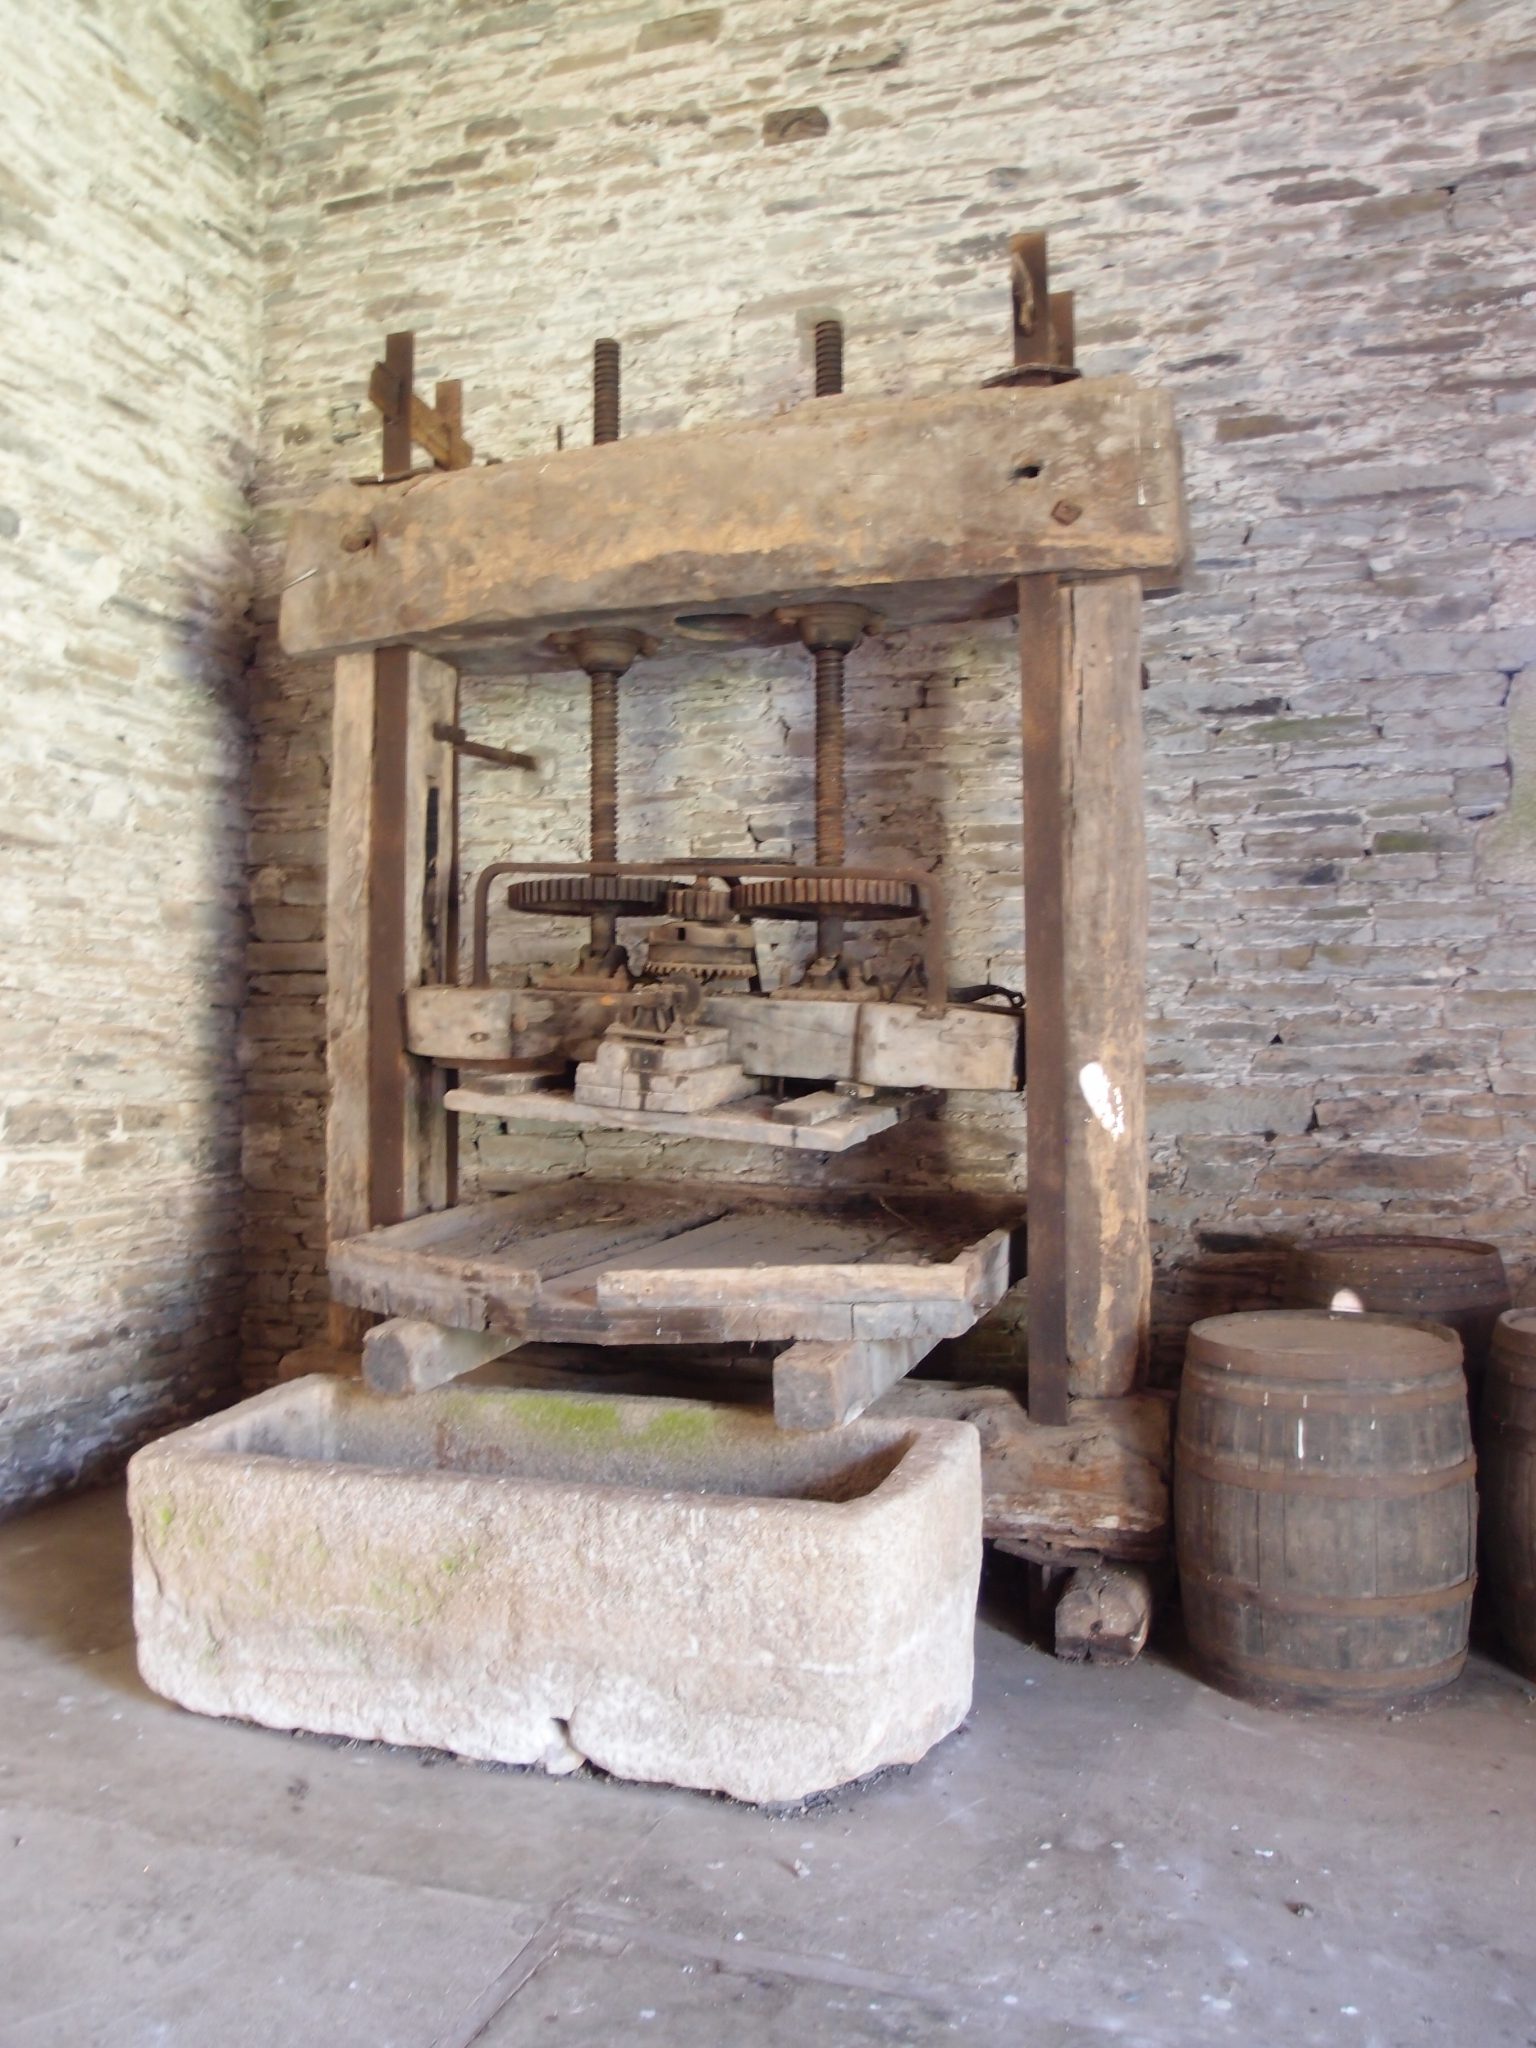 An 18th century Cider Press is installed at the north end of the Great Barn.